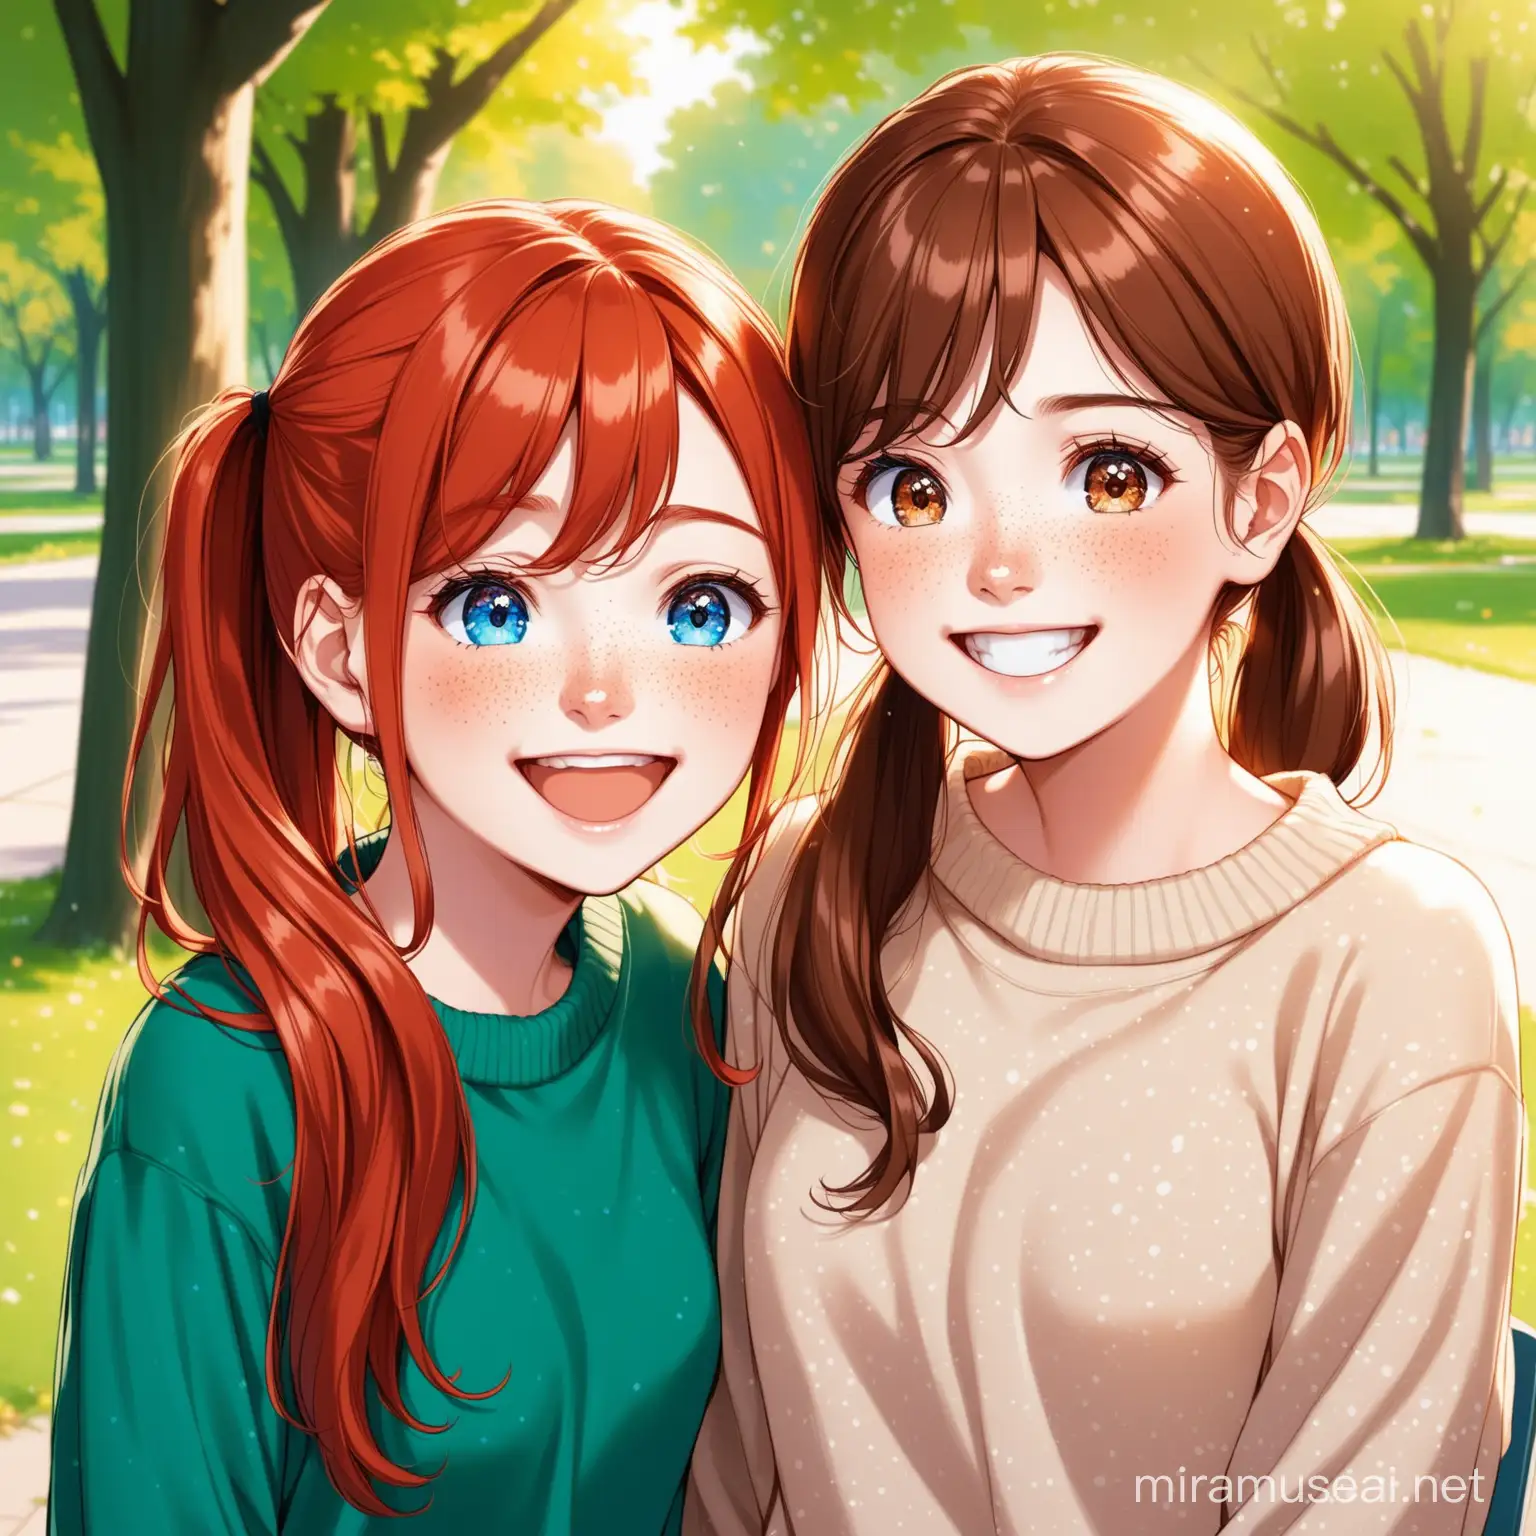 A red-haired girl with blue eyes and freckles in a sweater fifteen years old and a girl with brown hair in two ponytails with brown eyes laughing in the park